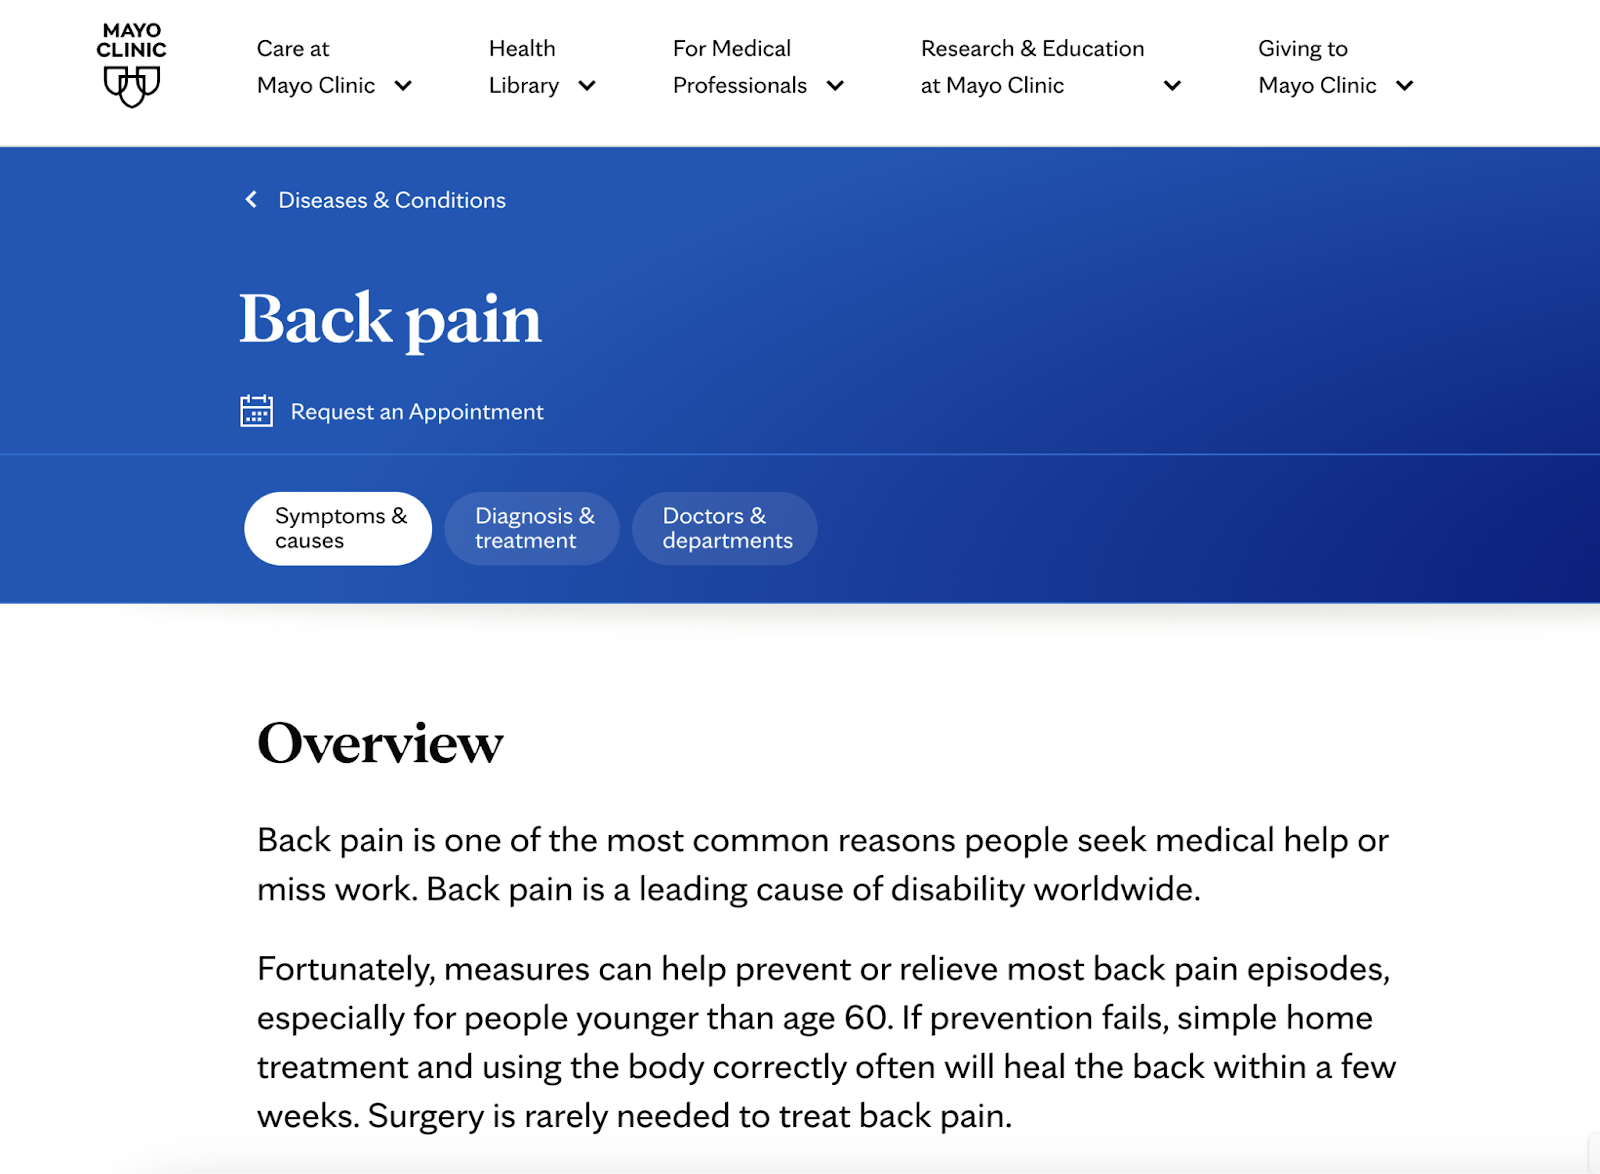 Mayo Clinic's ymyl article on back pain